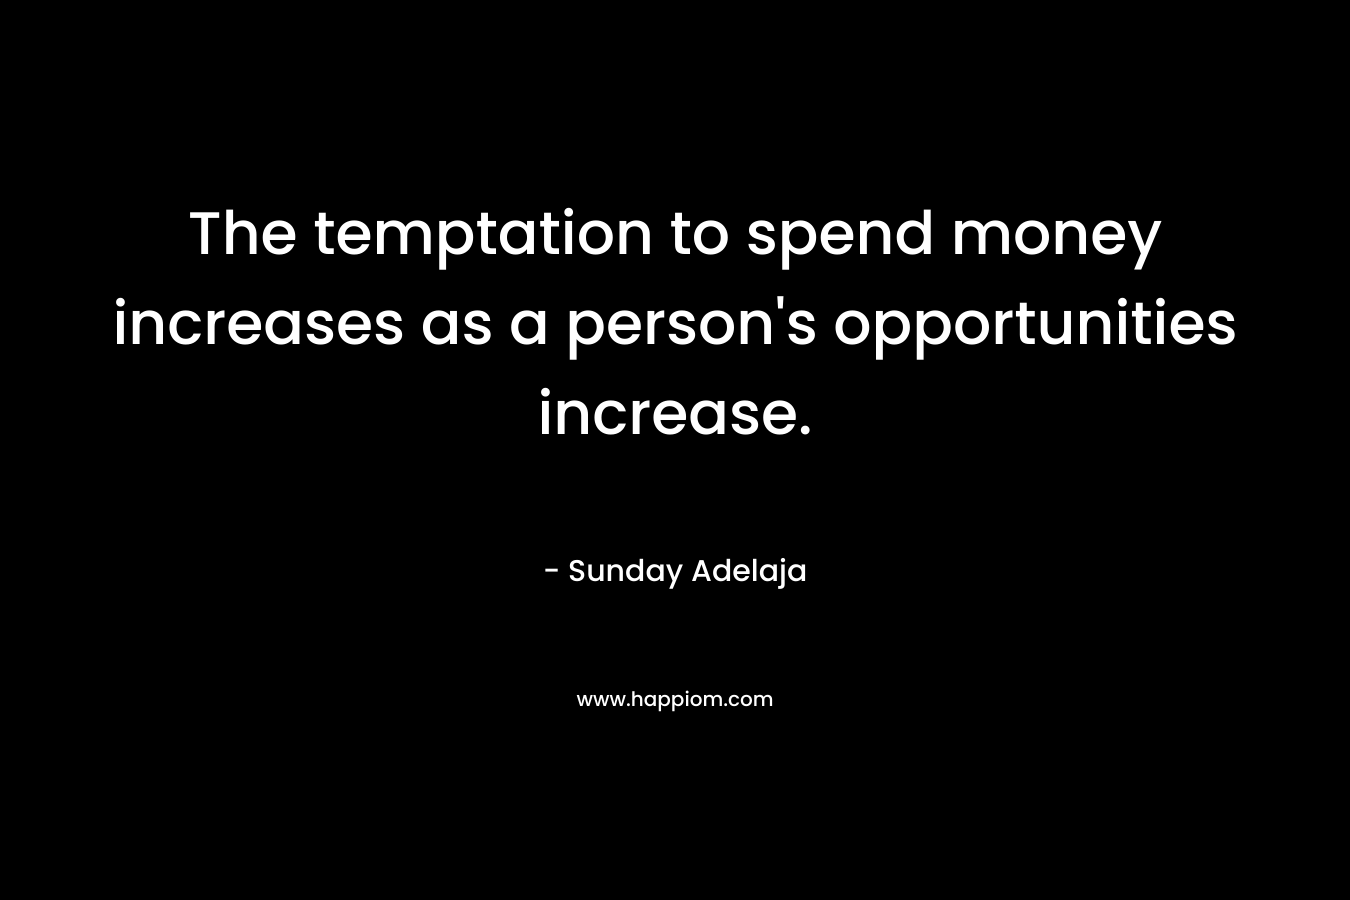 The temptation to spend money increases as a person’s opportunities increase. – Sunday Adelaja